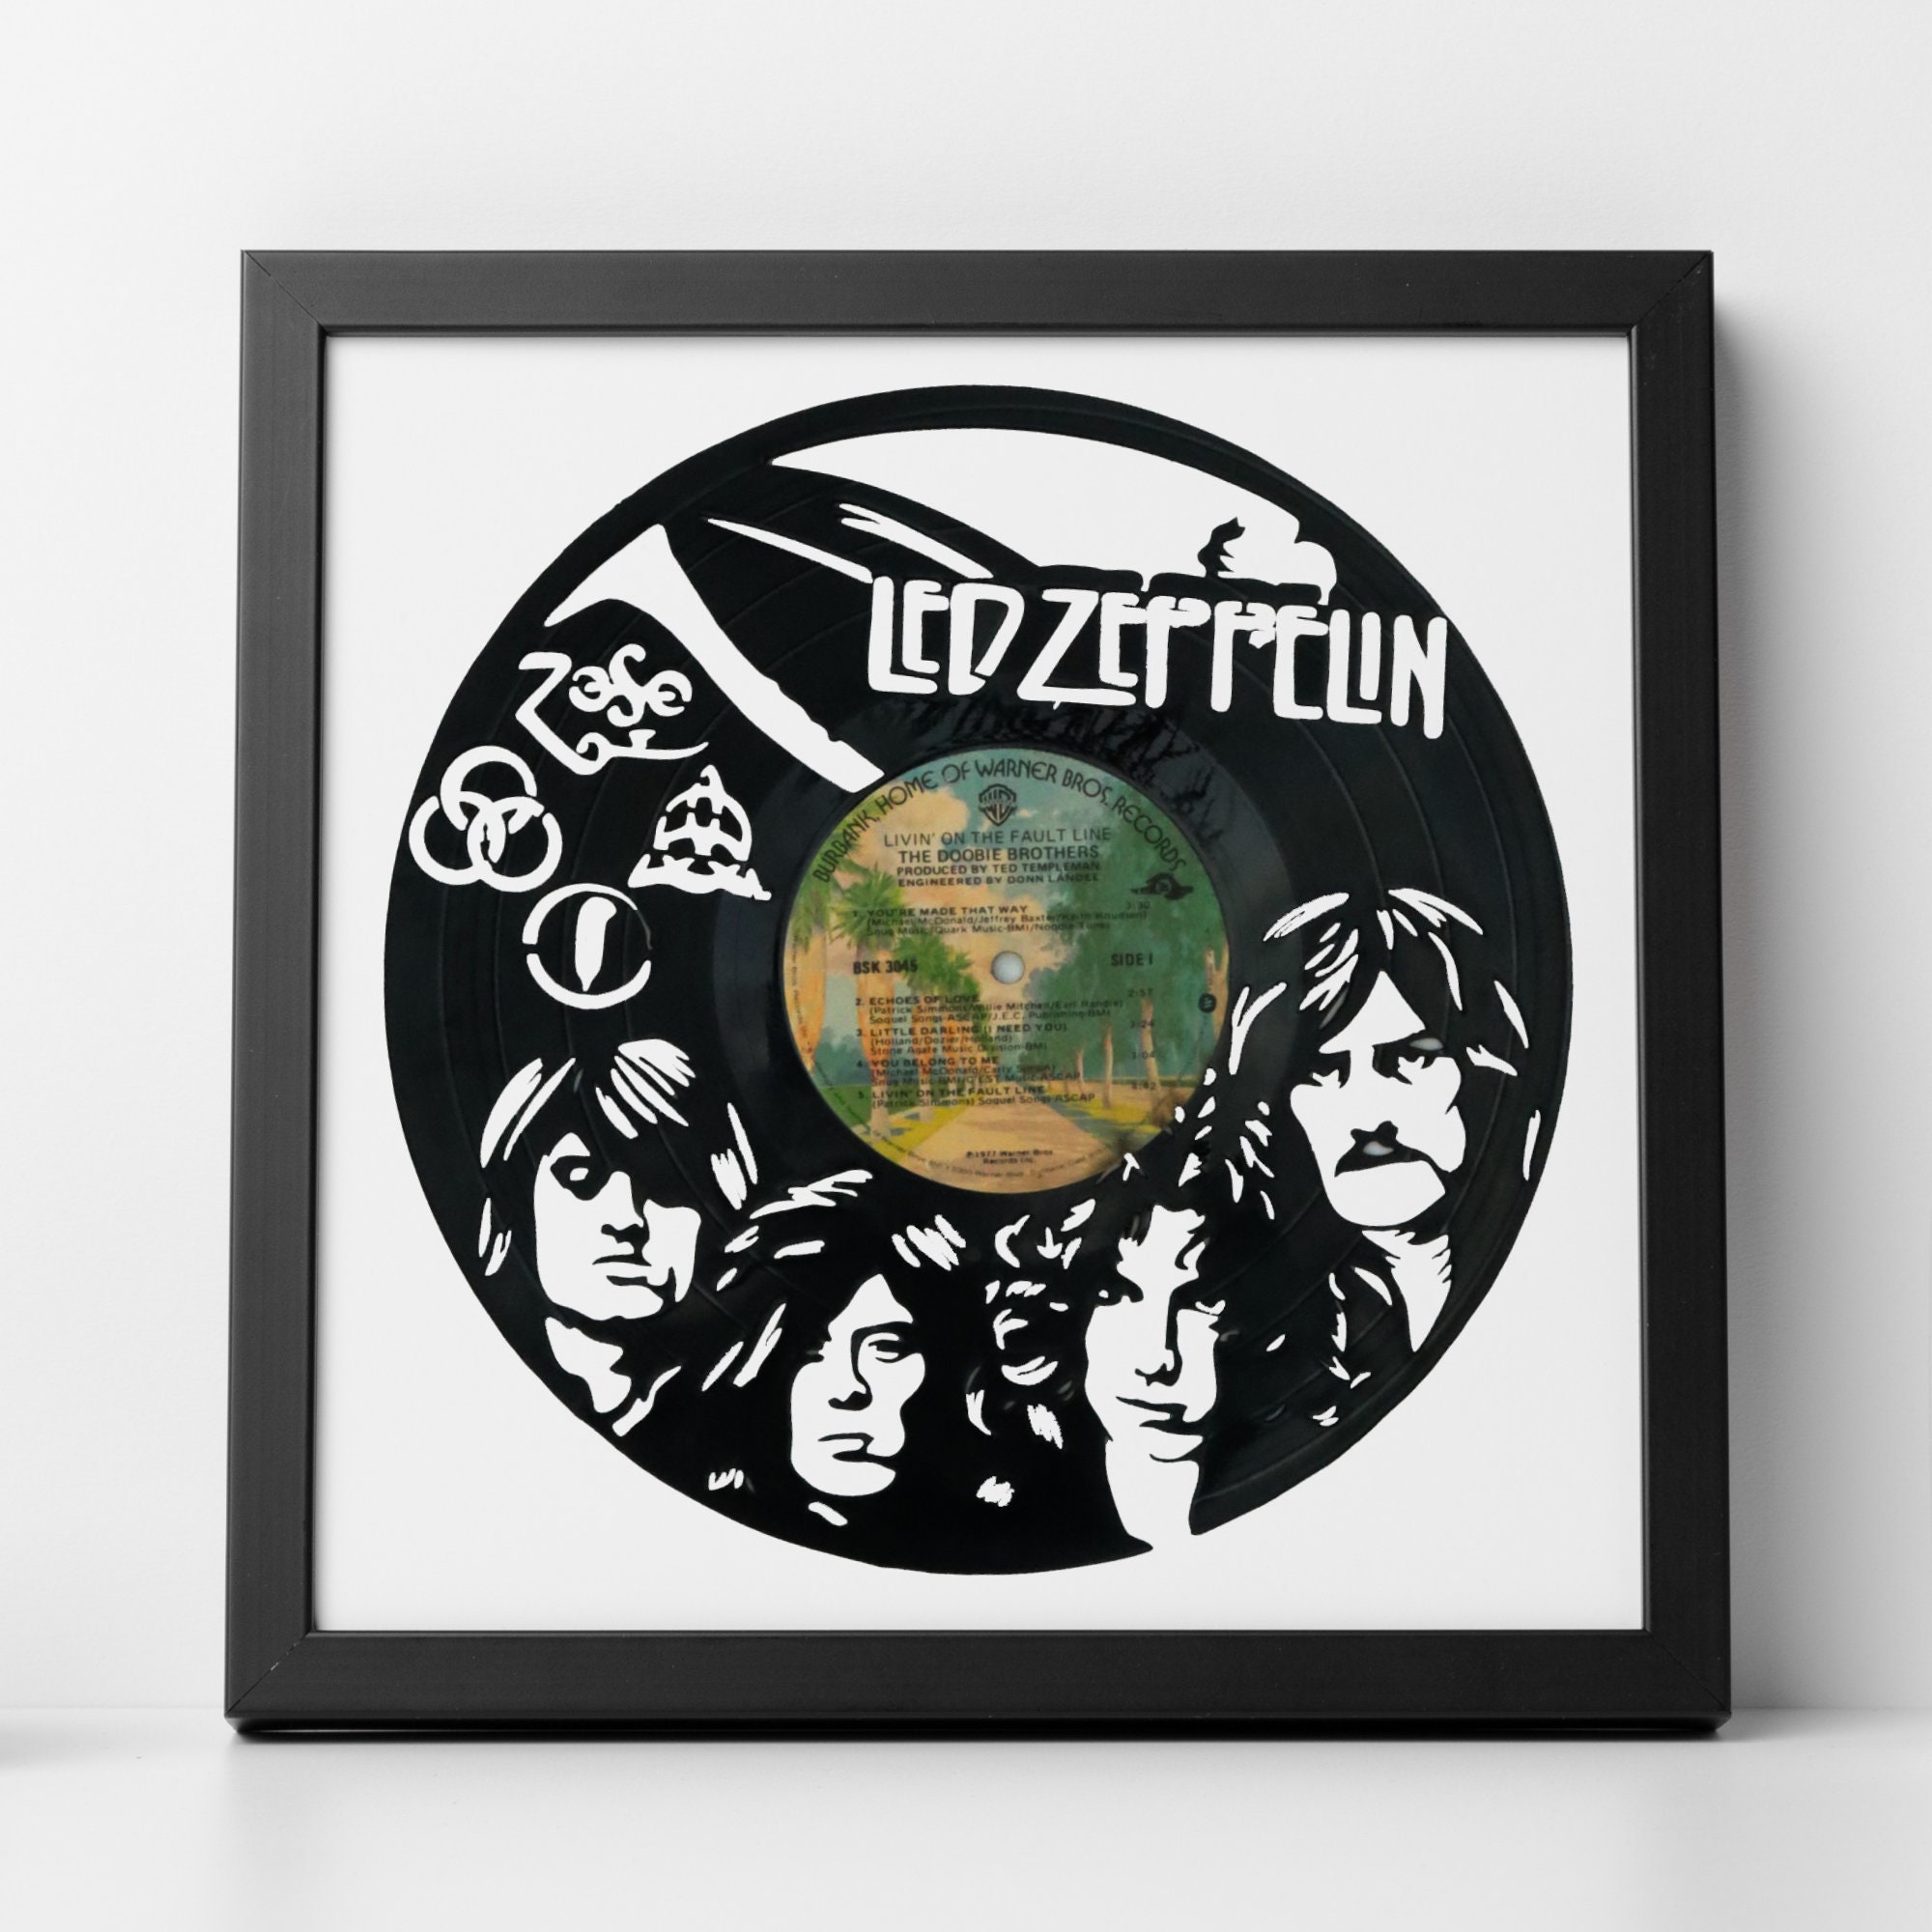 Led Zeppelin Stairway To Heaven Etched Gold 45 Record Ltd Edition Display -  Gold Record Outlet Album and Disc Collectible Memorabilia